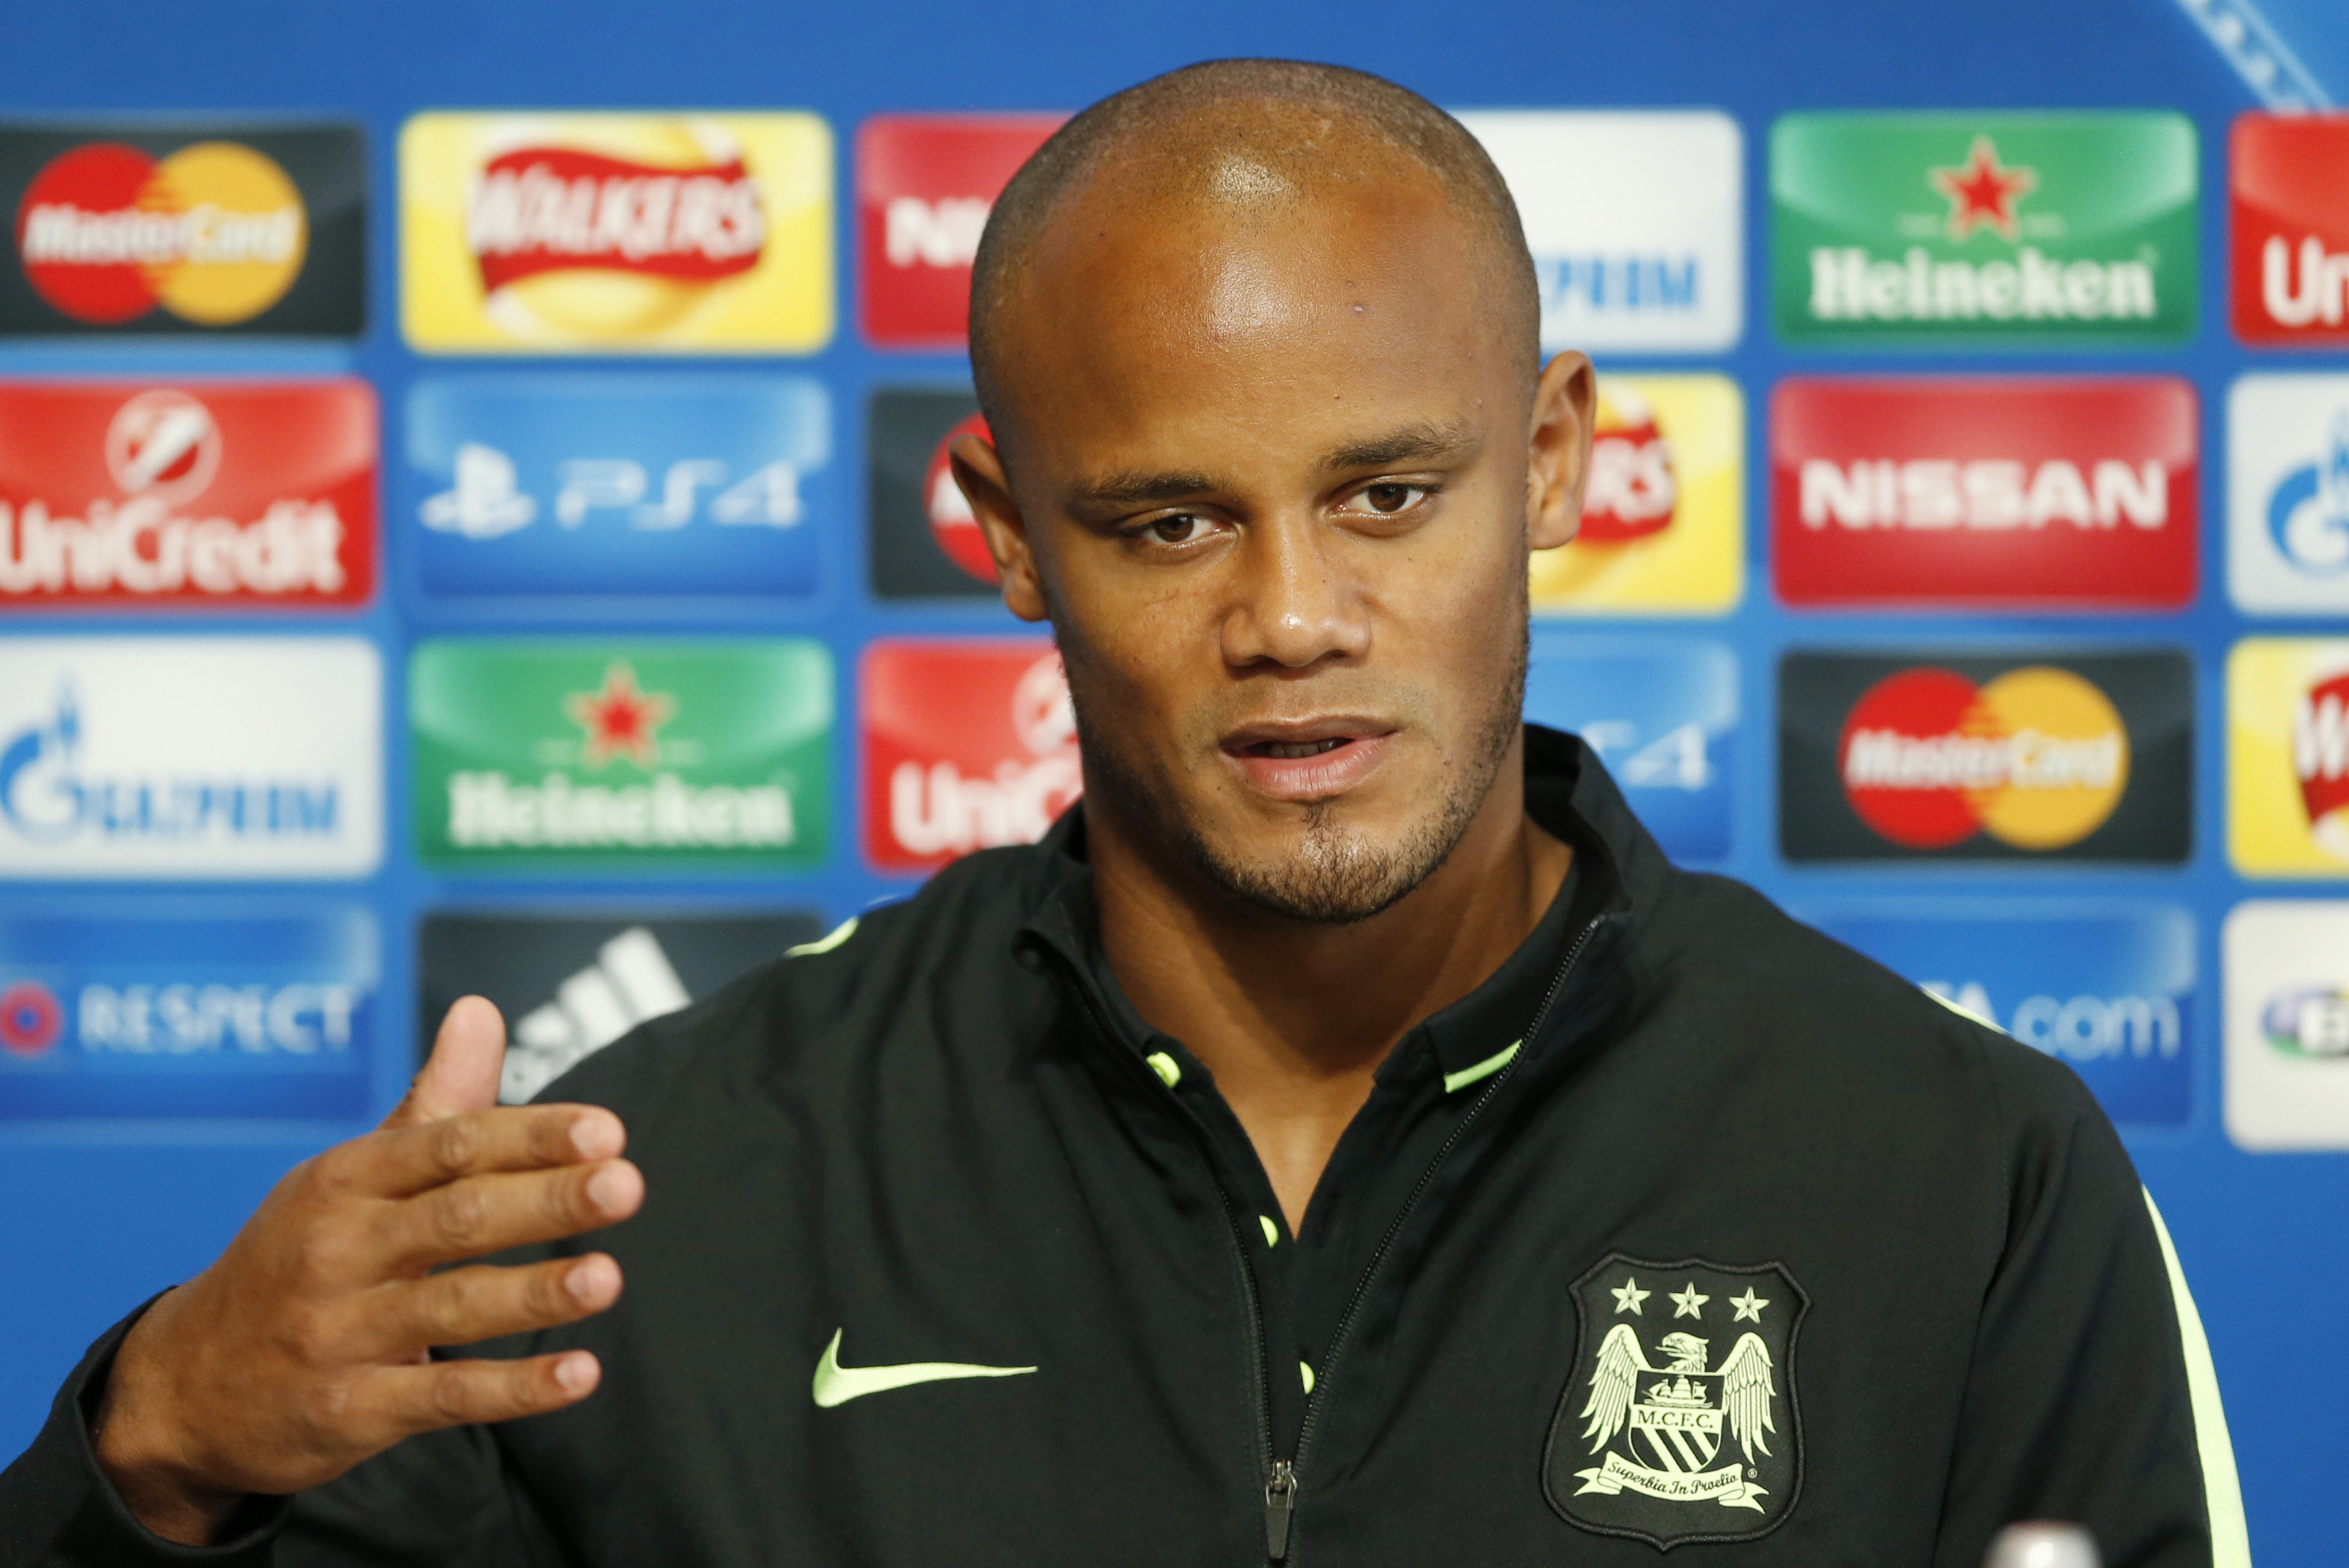 Football - Manchester City Press Conference - City Football Academy, Manchester, England - 14/9/15nManchester City's Vincent Kompany during the press conferencenAction Images via Reuters / Carl RecinenLivepicnEDITORIAL USE ONLY.